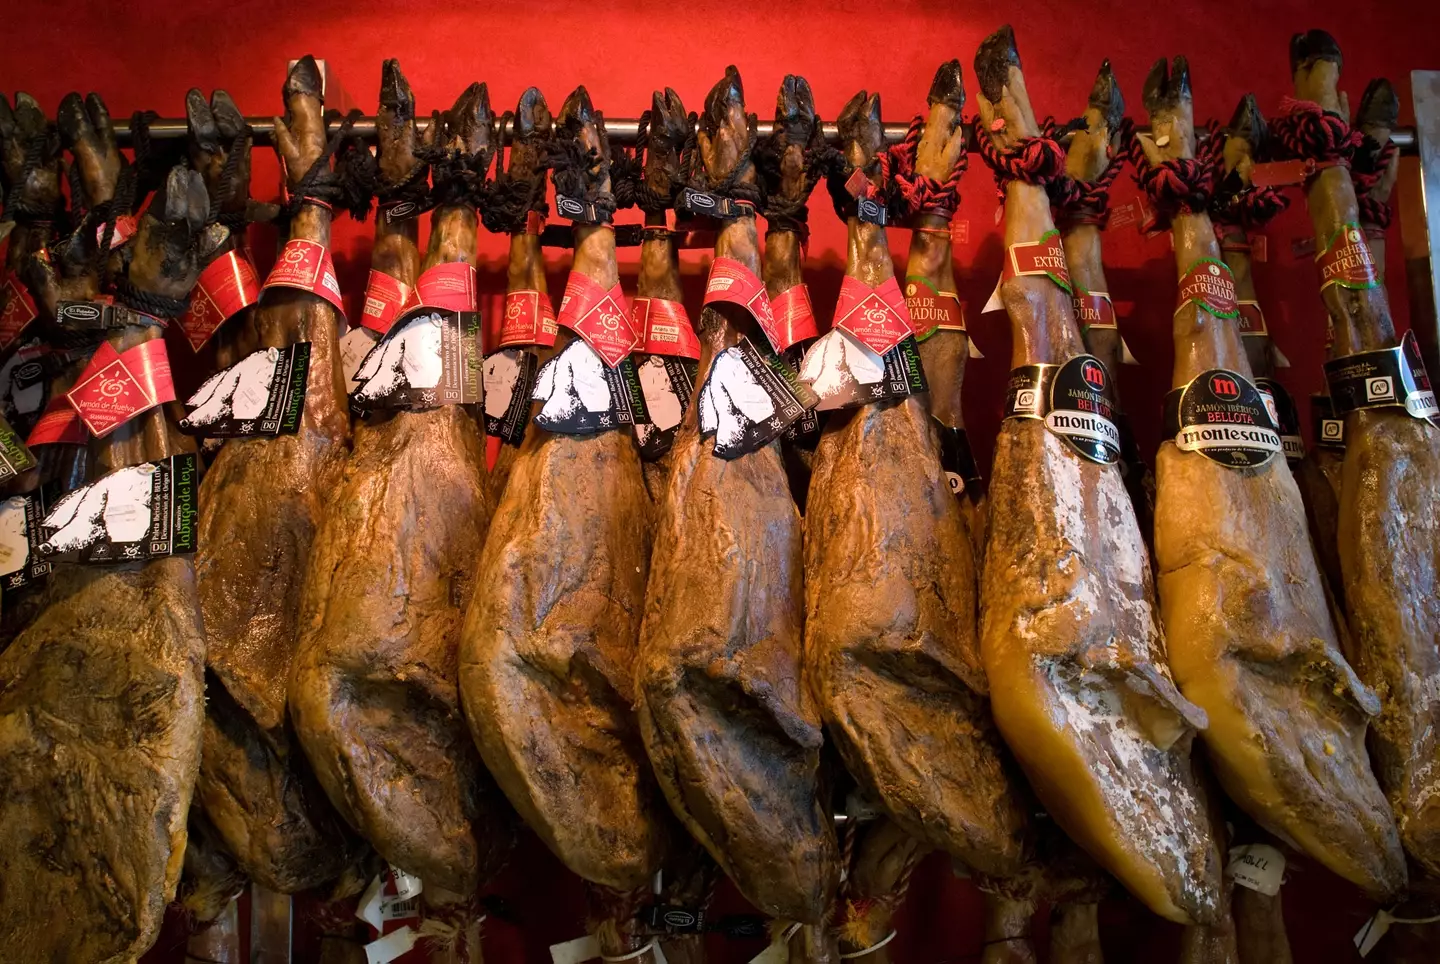 There's been more than one ham heist in Spain over the years.